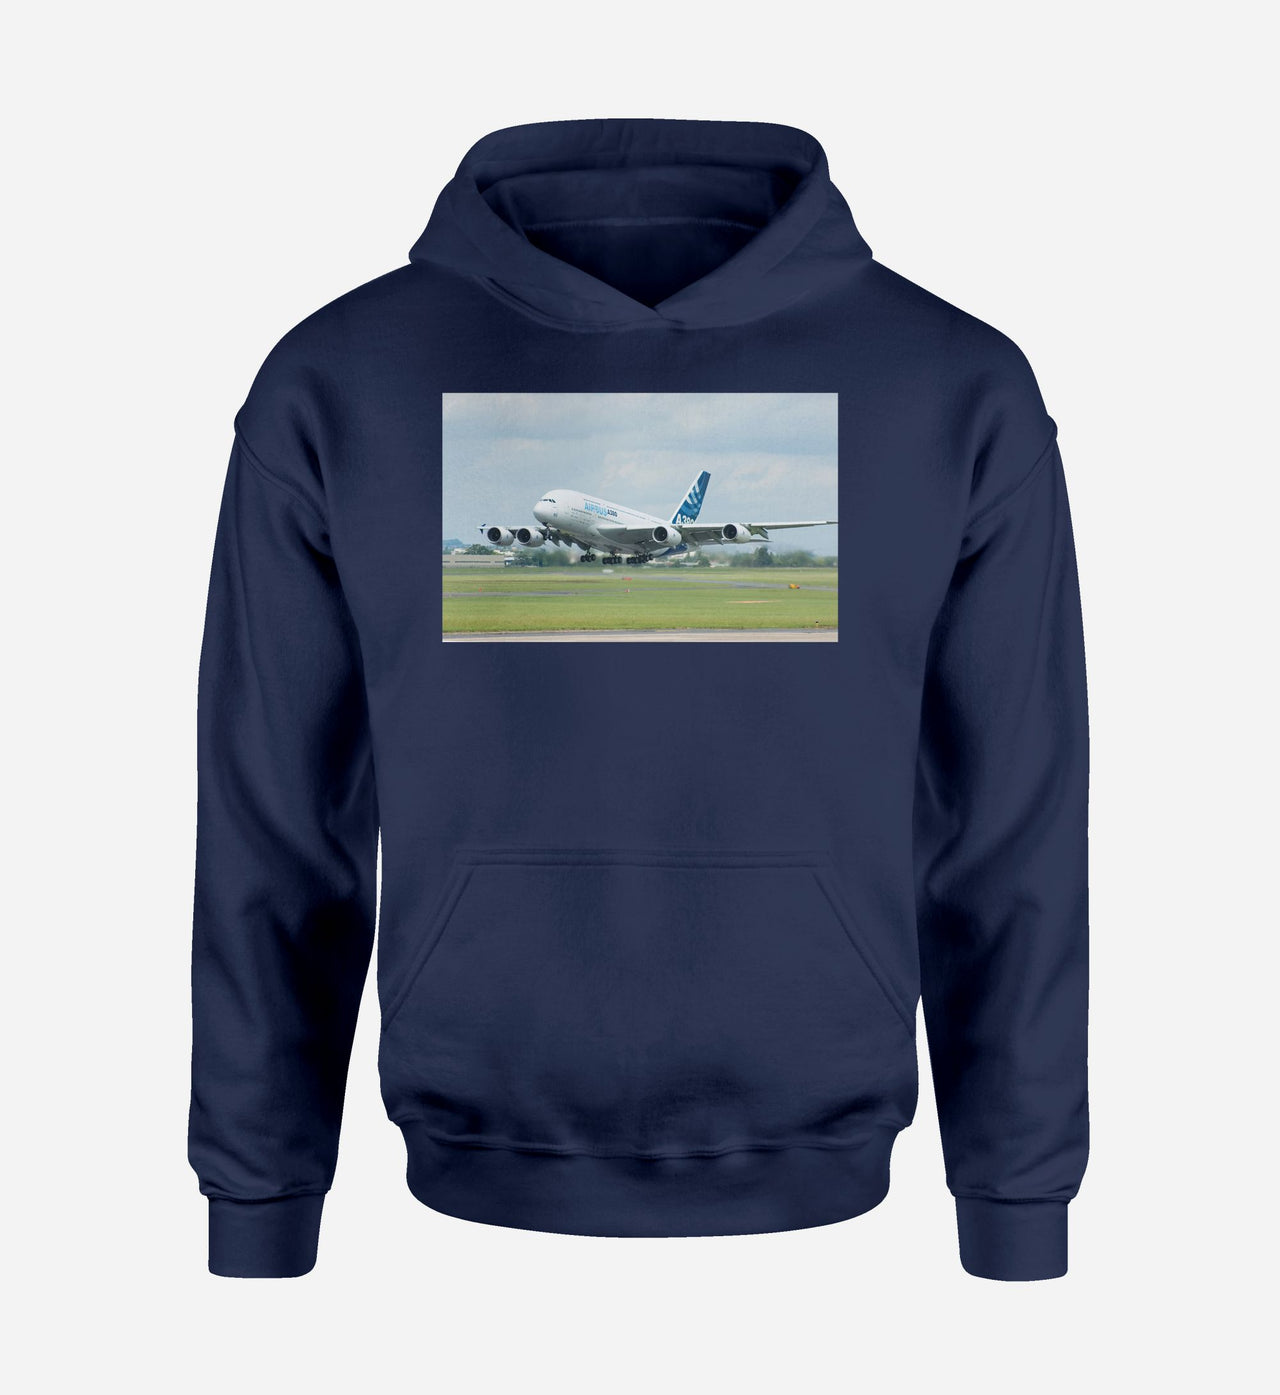 Departing Airbus A380 with Original Livery Designed Hoodies